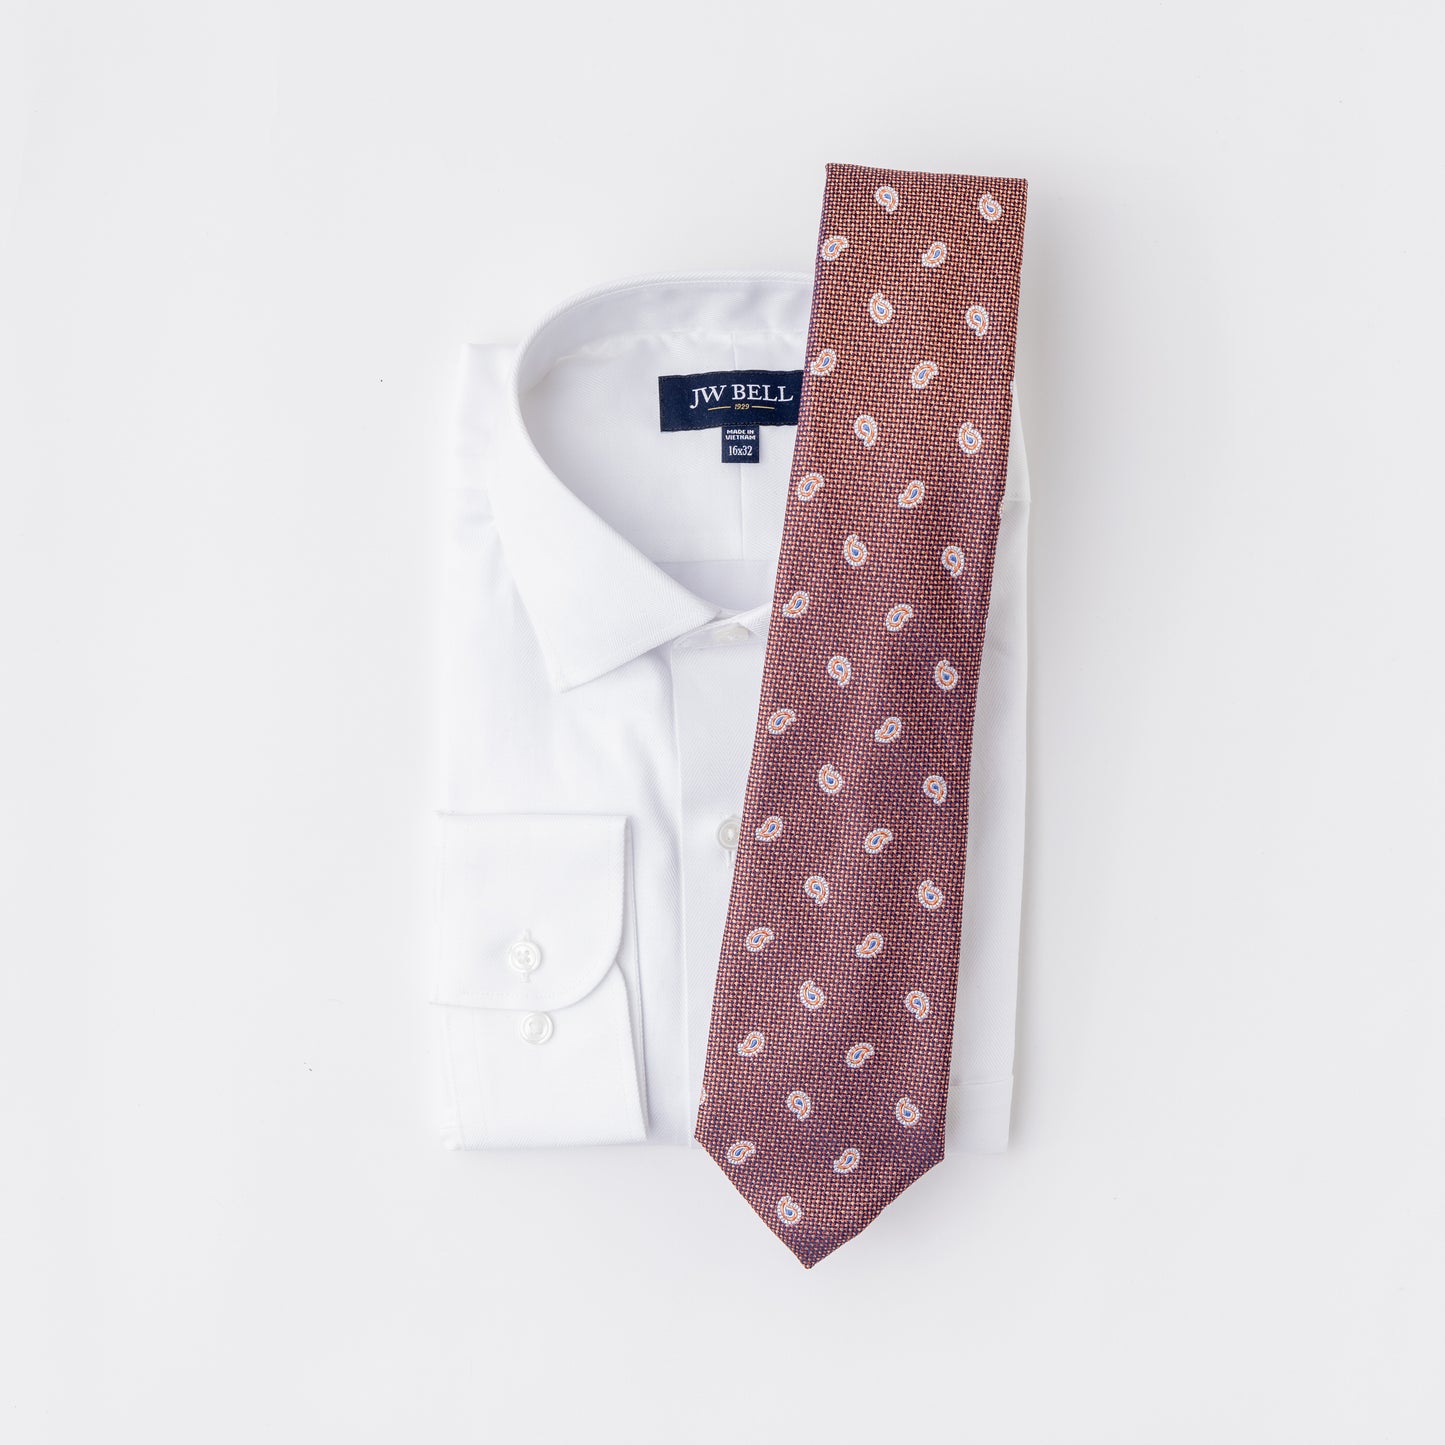 Textured Pines Tie - 4 Colors Available